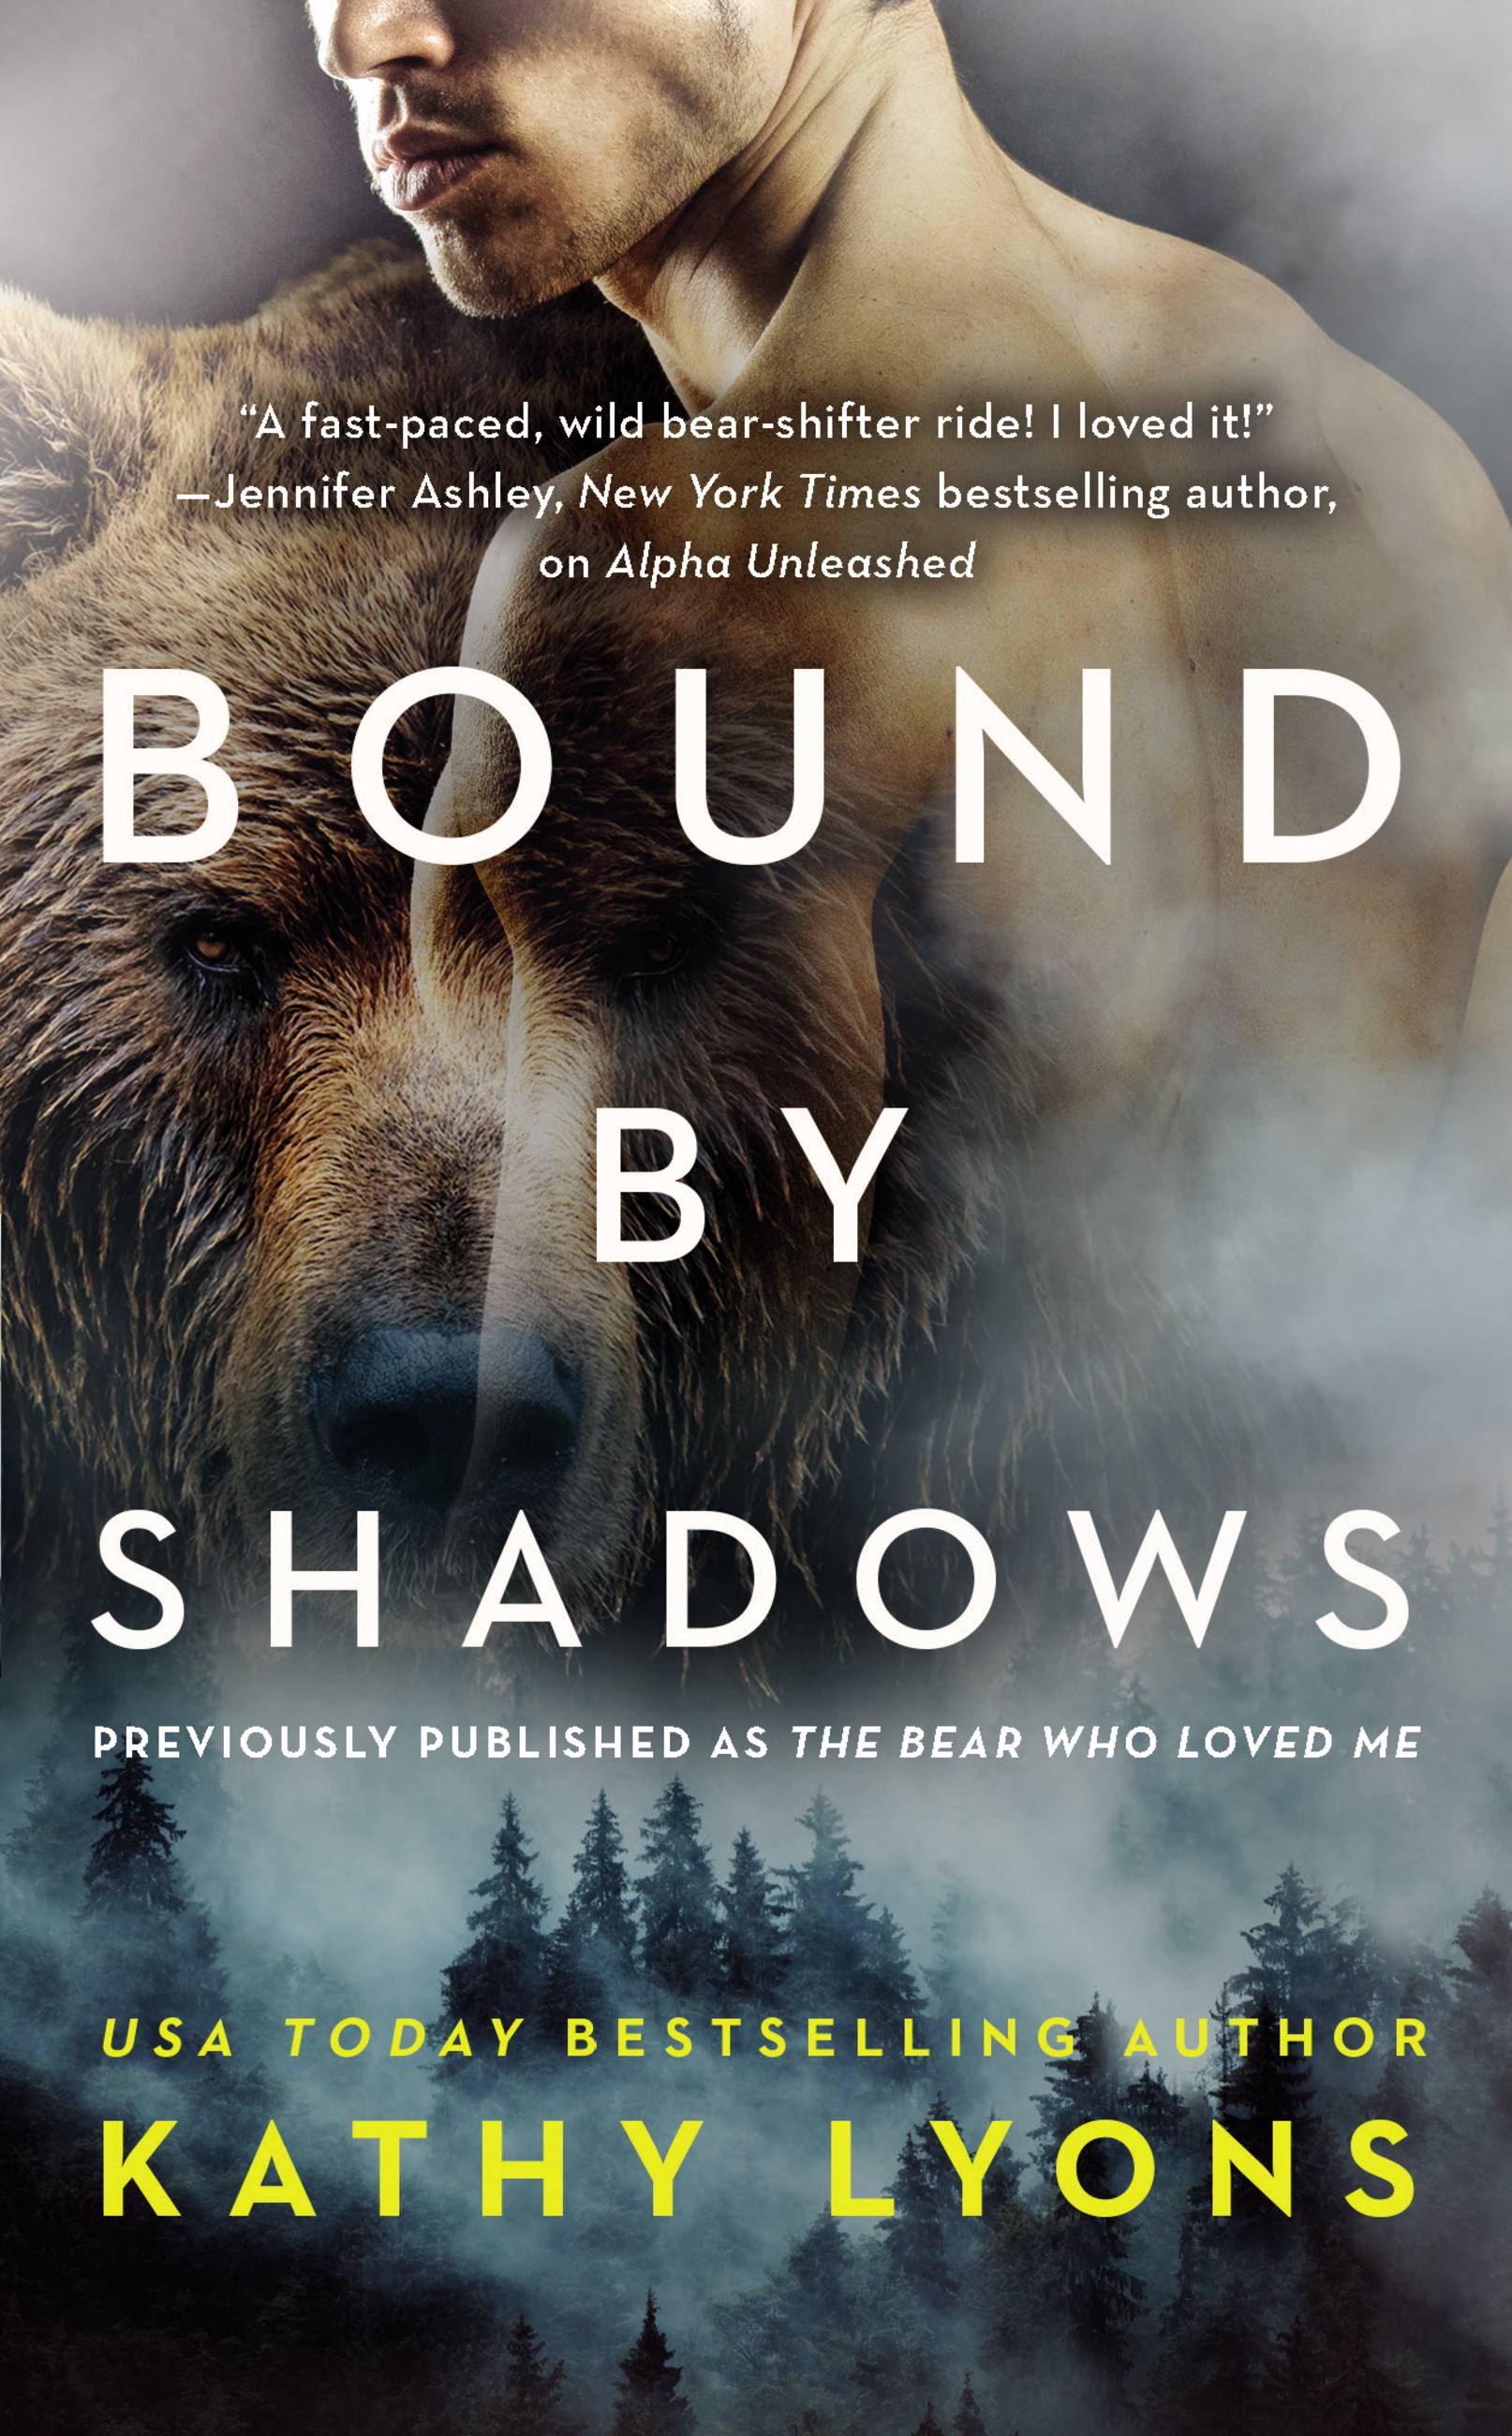 Bound by Shadows (previously published as The Bear Who Loved Me) by Kathy Lyons Hachette Book Group photo